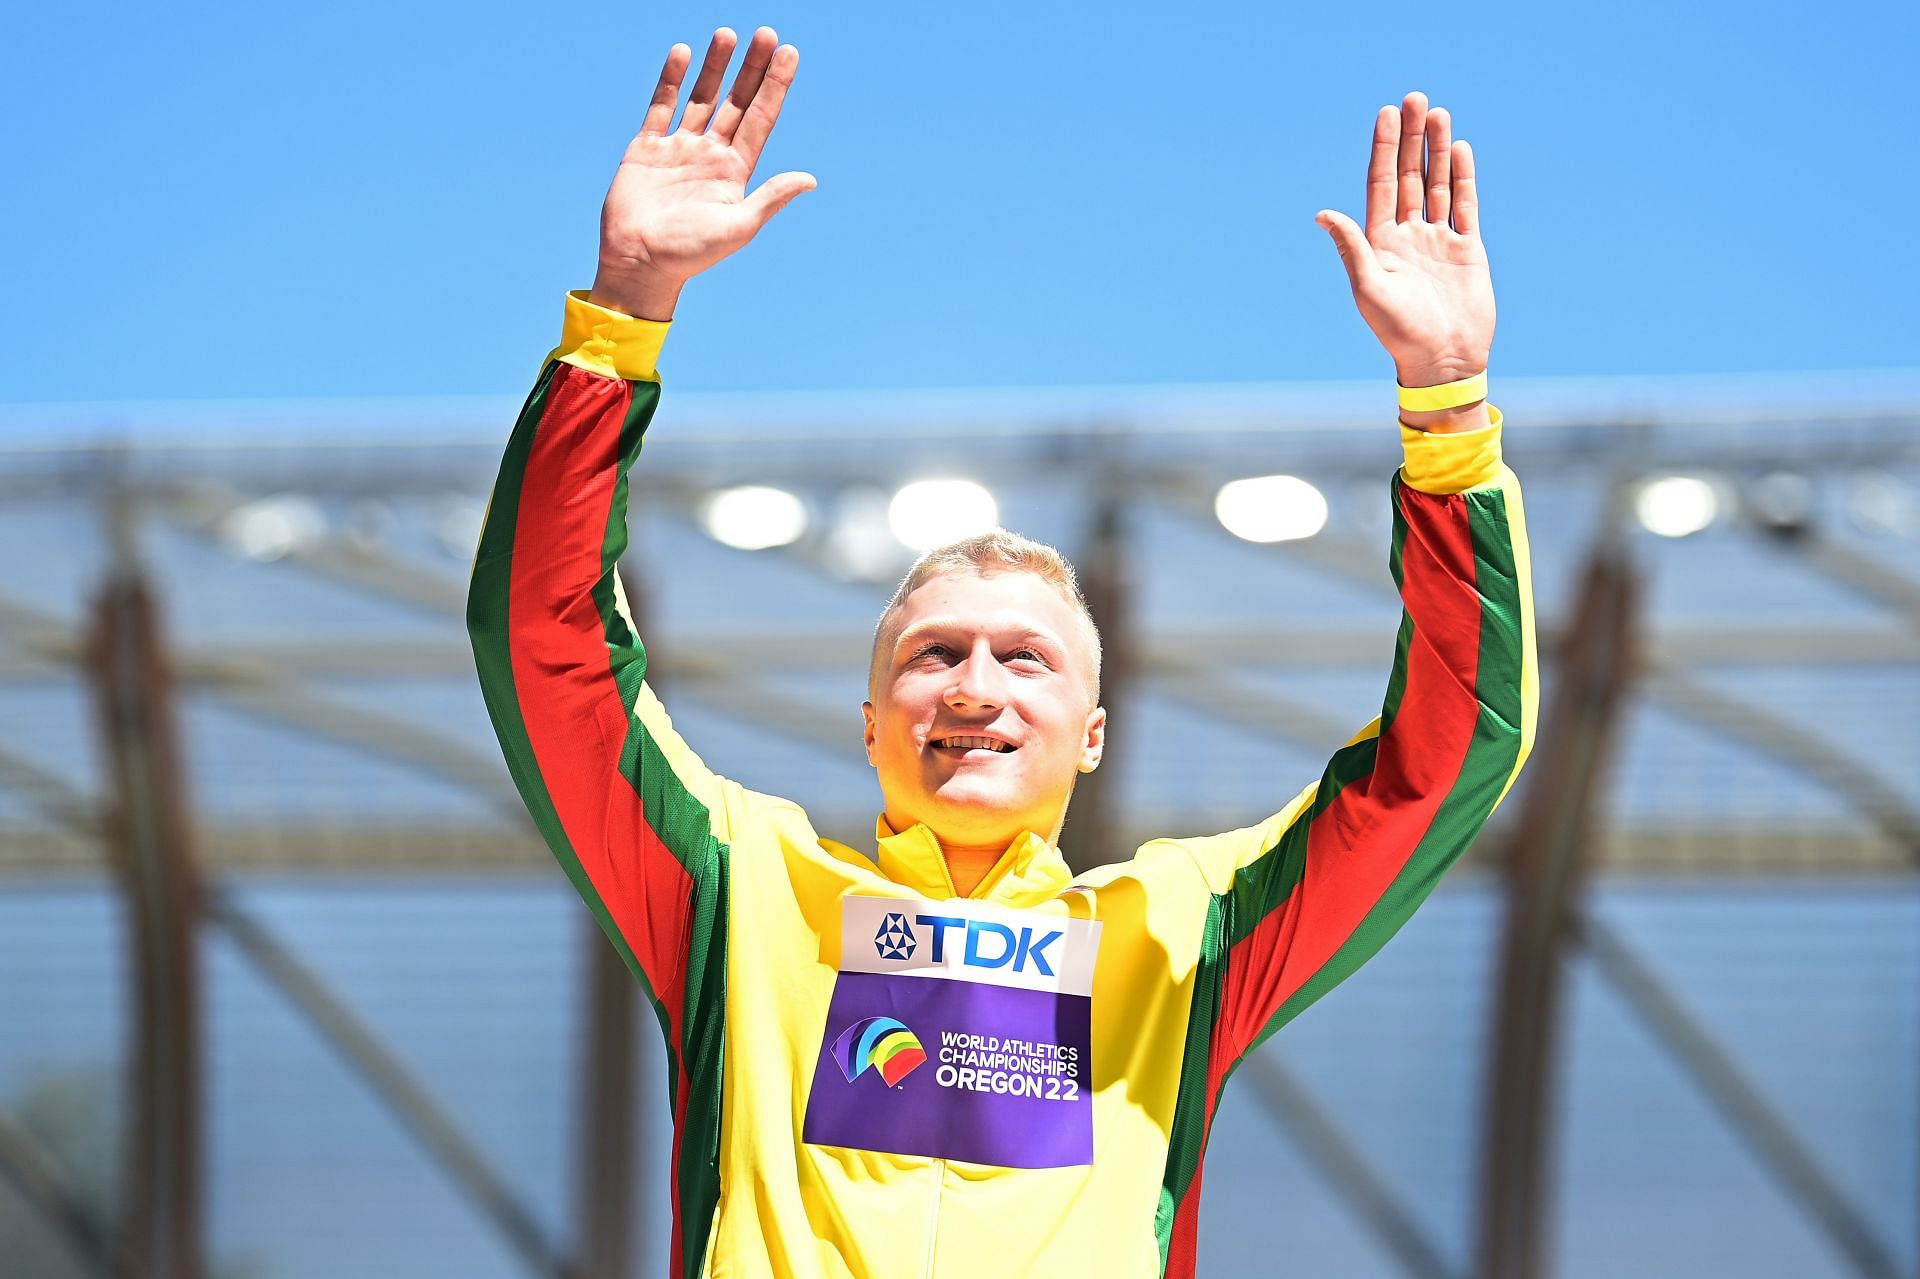 Silver Medalist Mykolas Alekna of Team Lithuania poses during the medal ceremony for the Men&#039;s Discus Final on day six of the World Athletics Championships Oregon22 at Hayward Field on July 20, 2022 in Eugene, Oregon. (Photo by Hannah Peters/Getty Images for World Athletics)